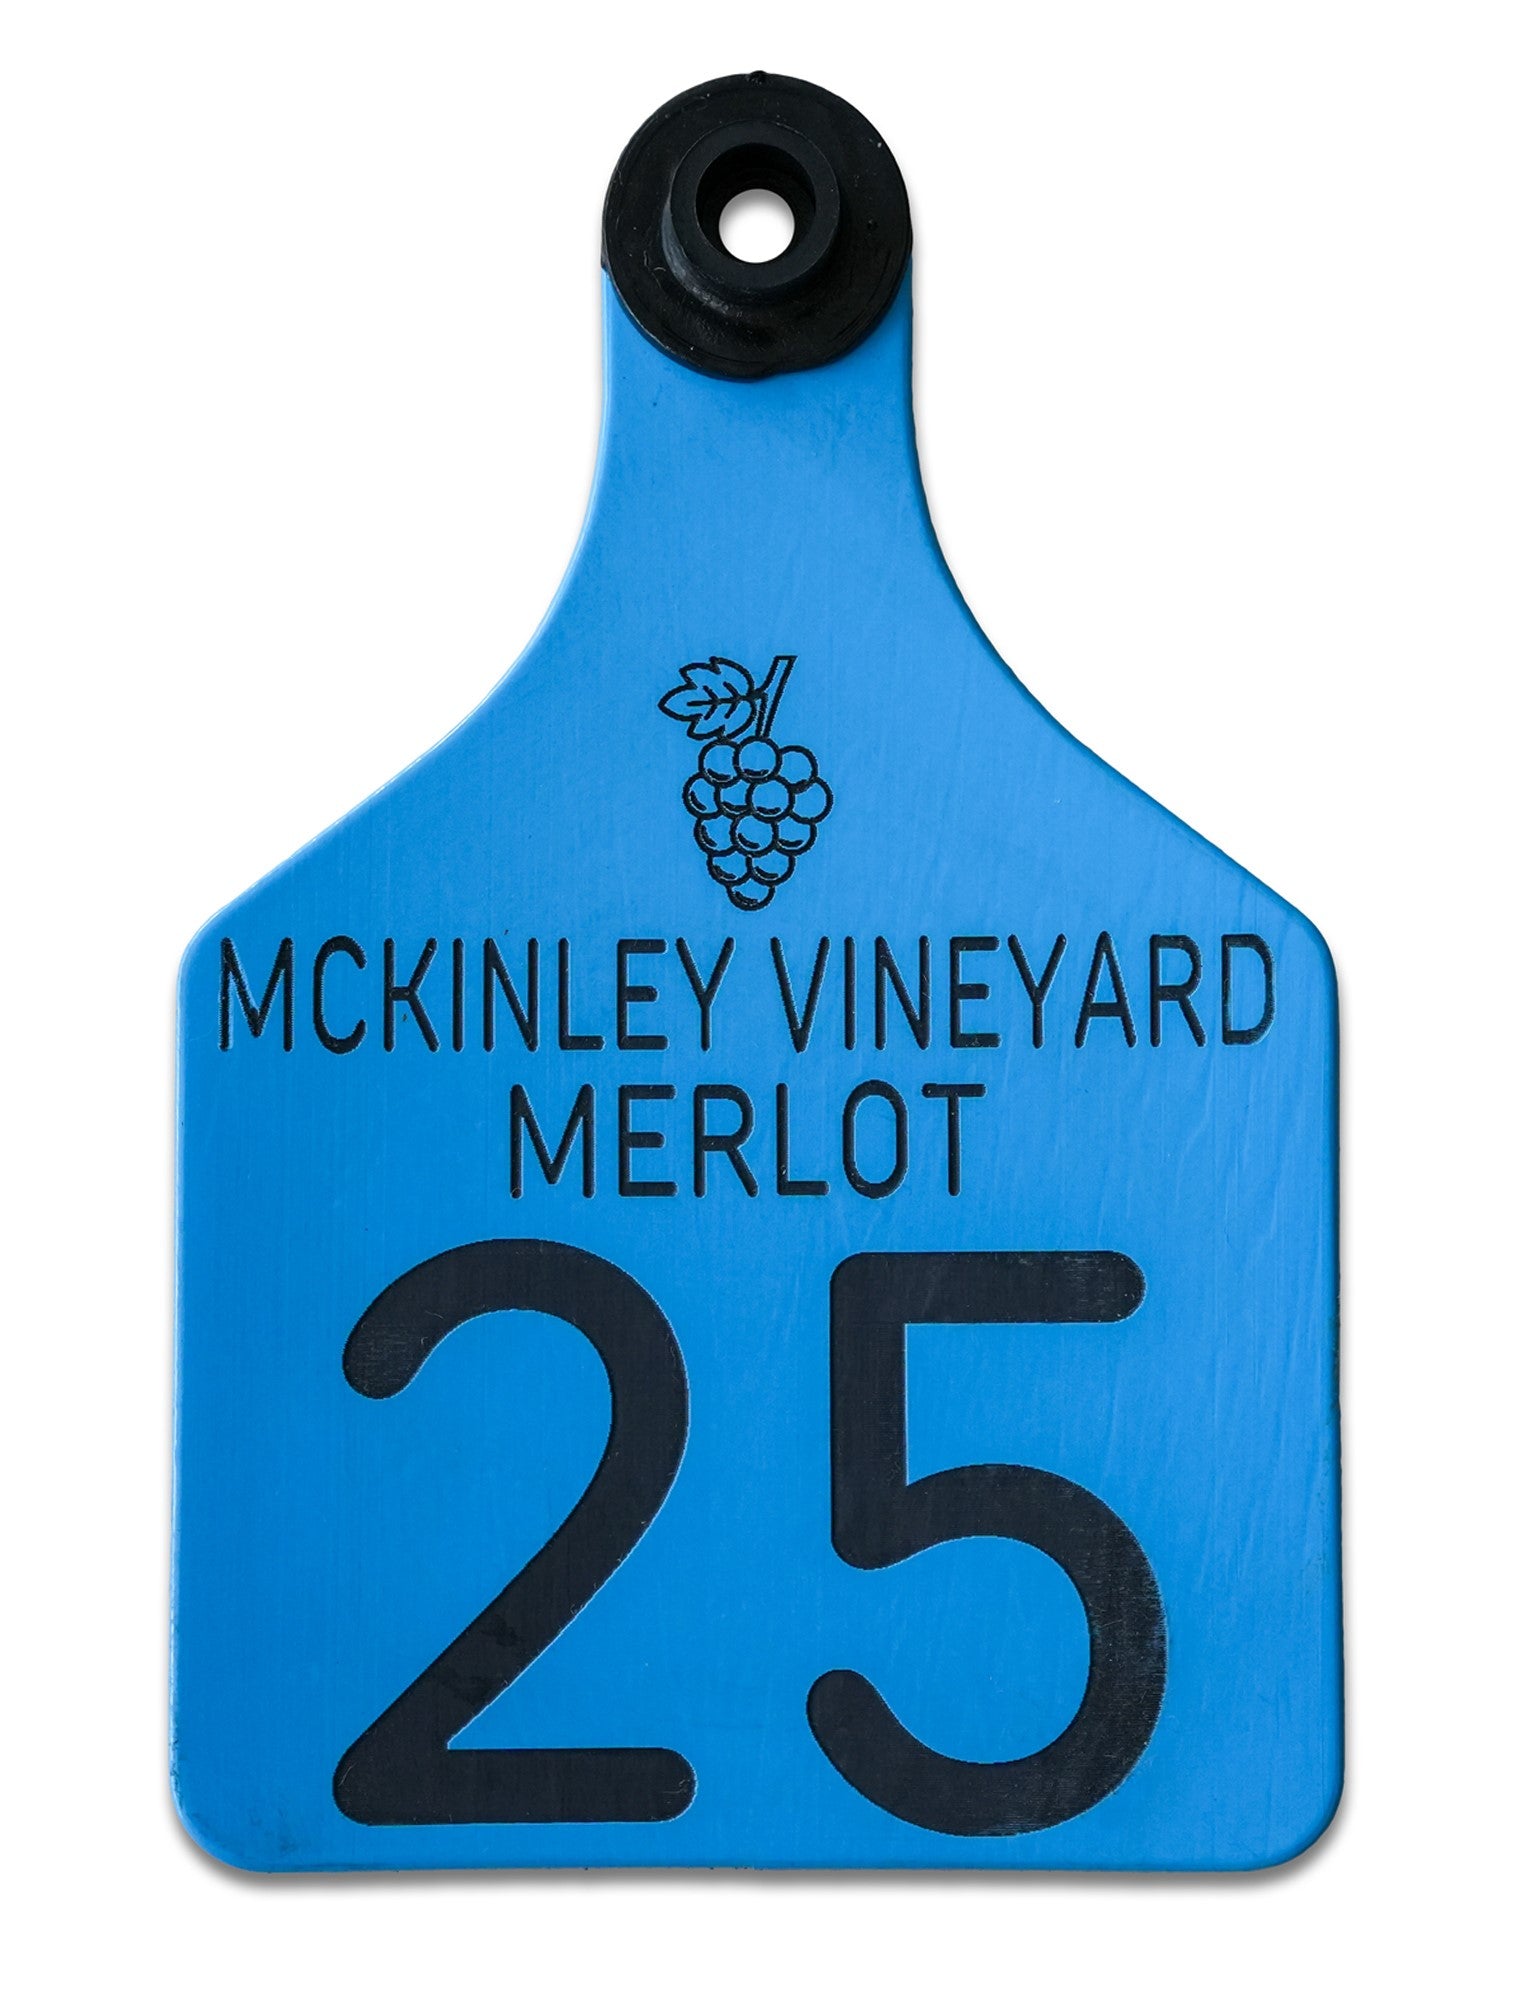 Vineyard tag light blue and black in color.  